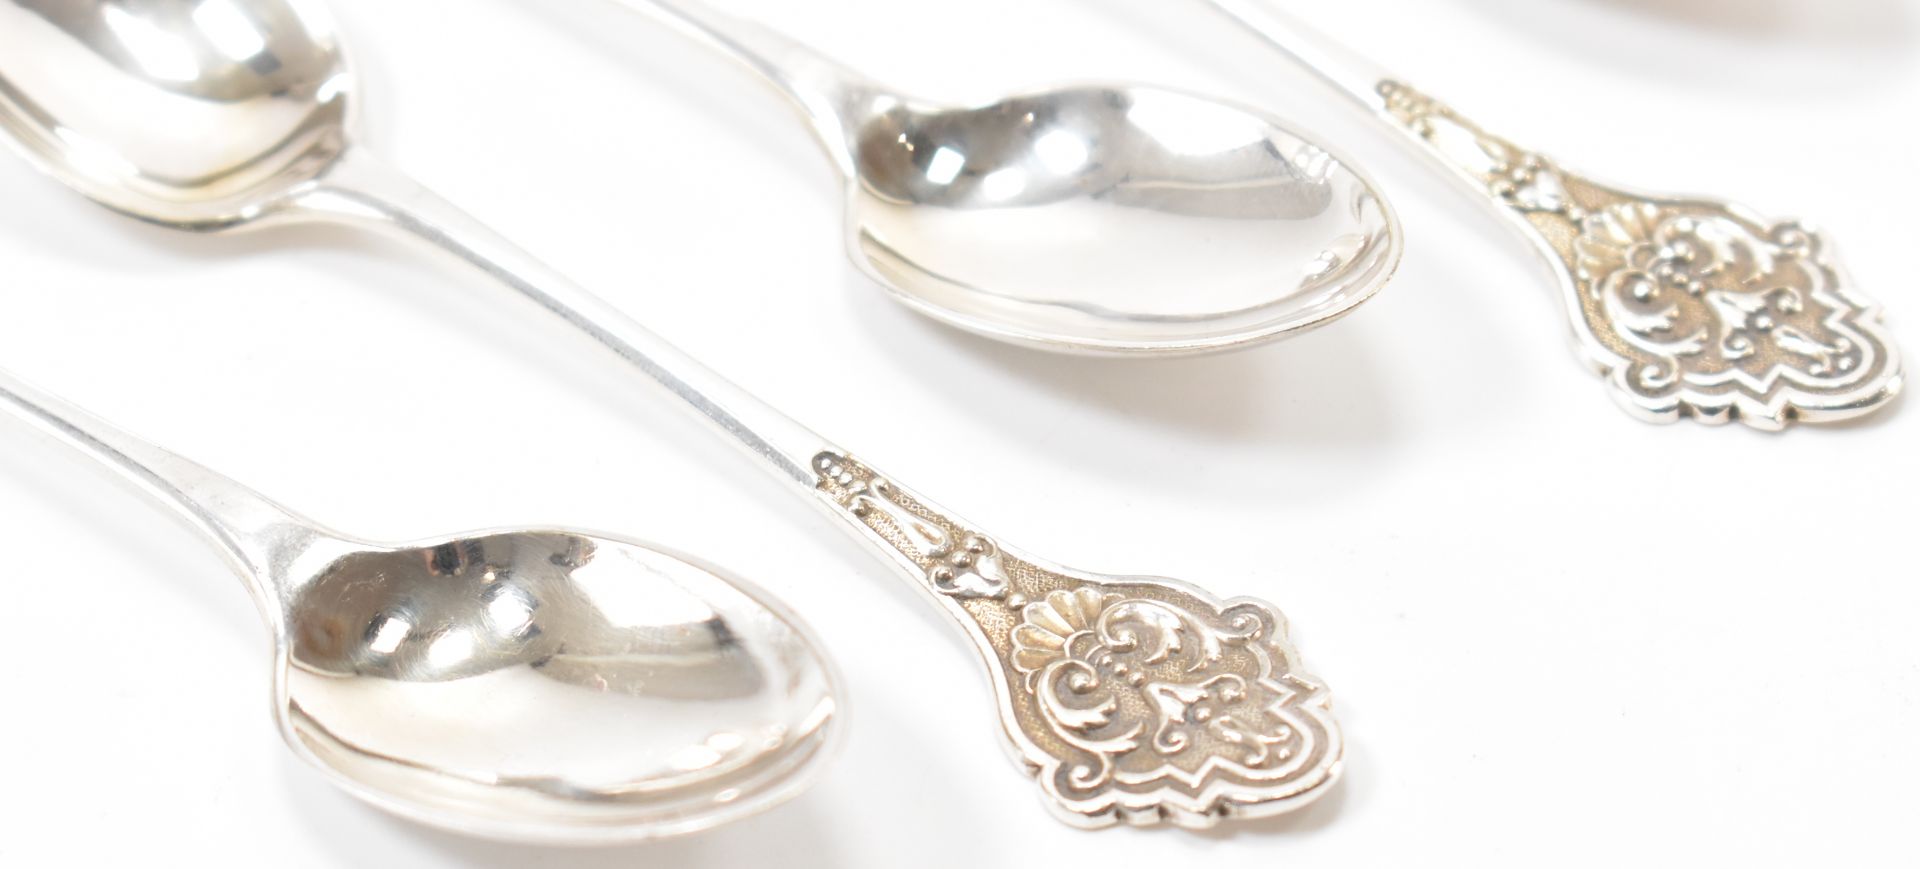 SIX VICTORIAN THOMAS PRIME SILVER PLATED TEA SPOONS - Image 2 of 5